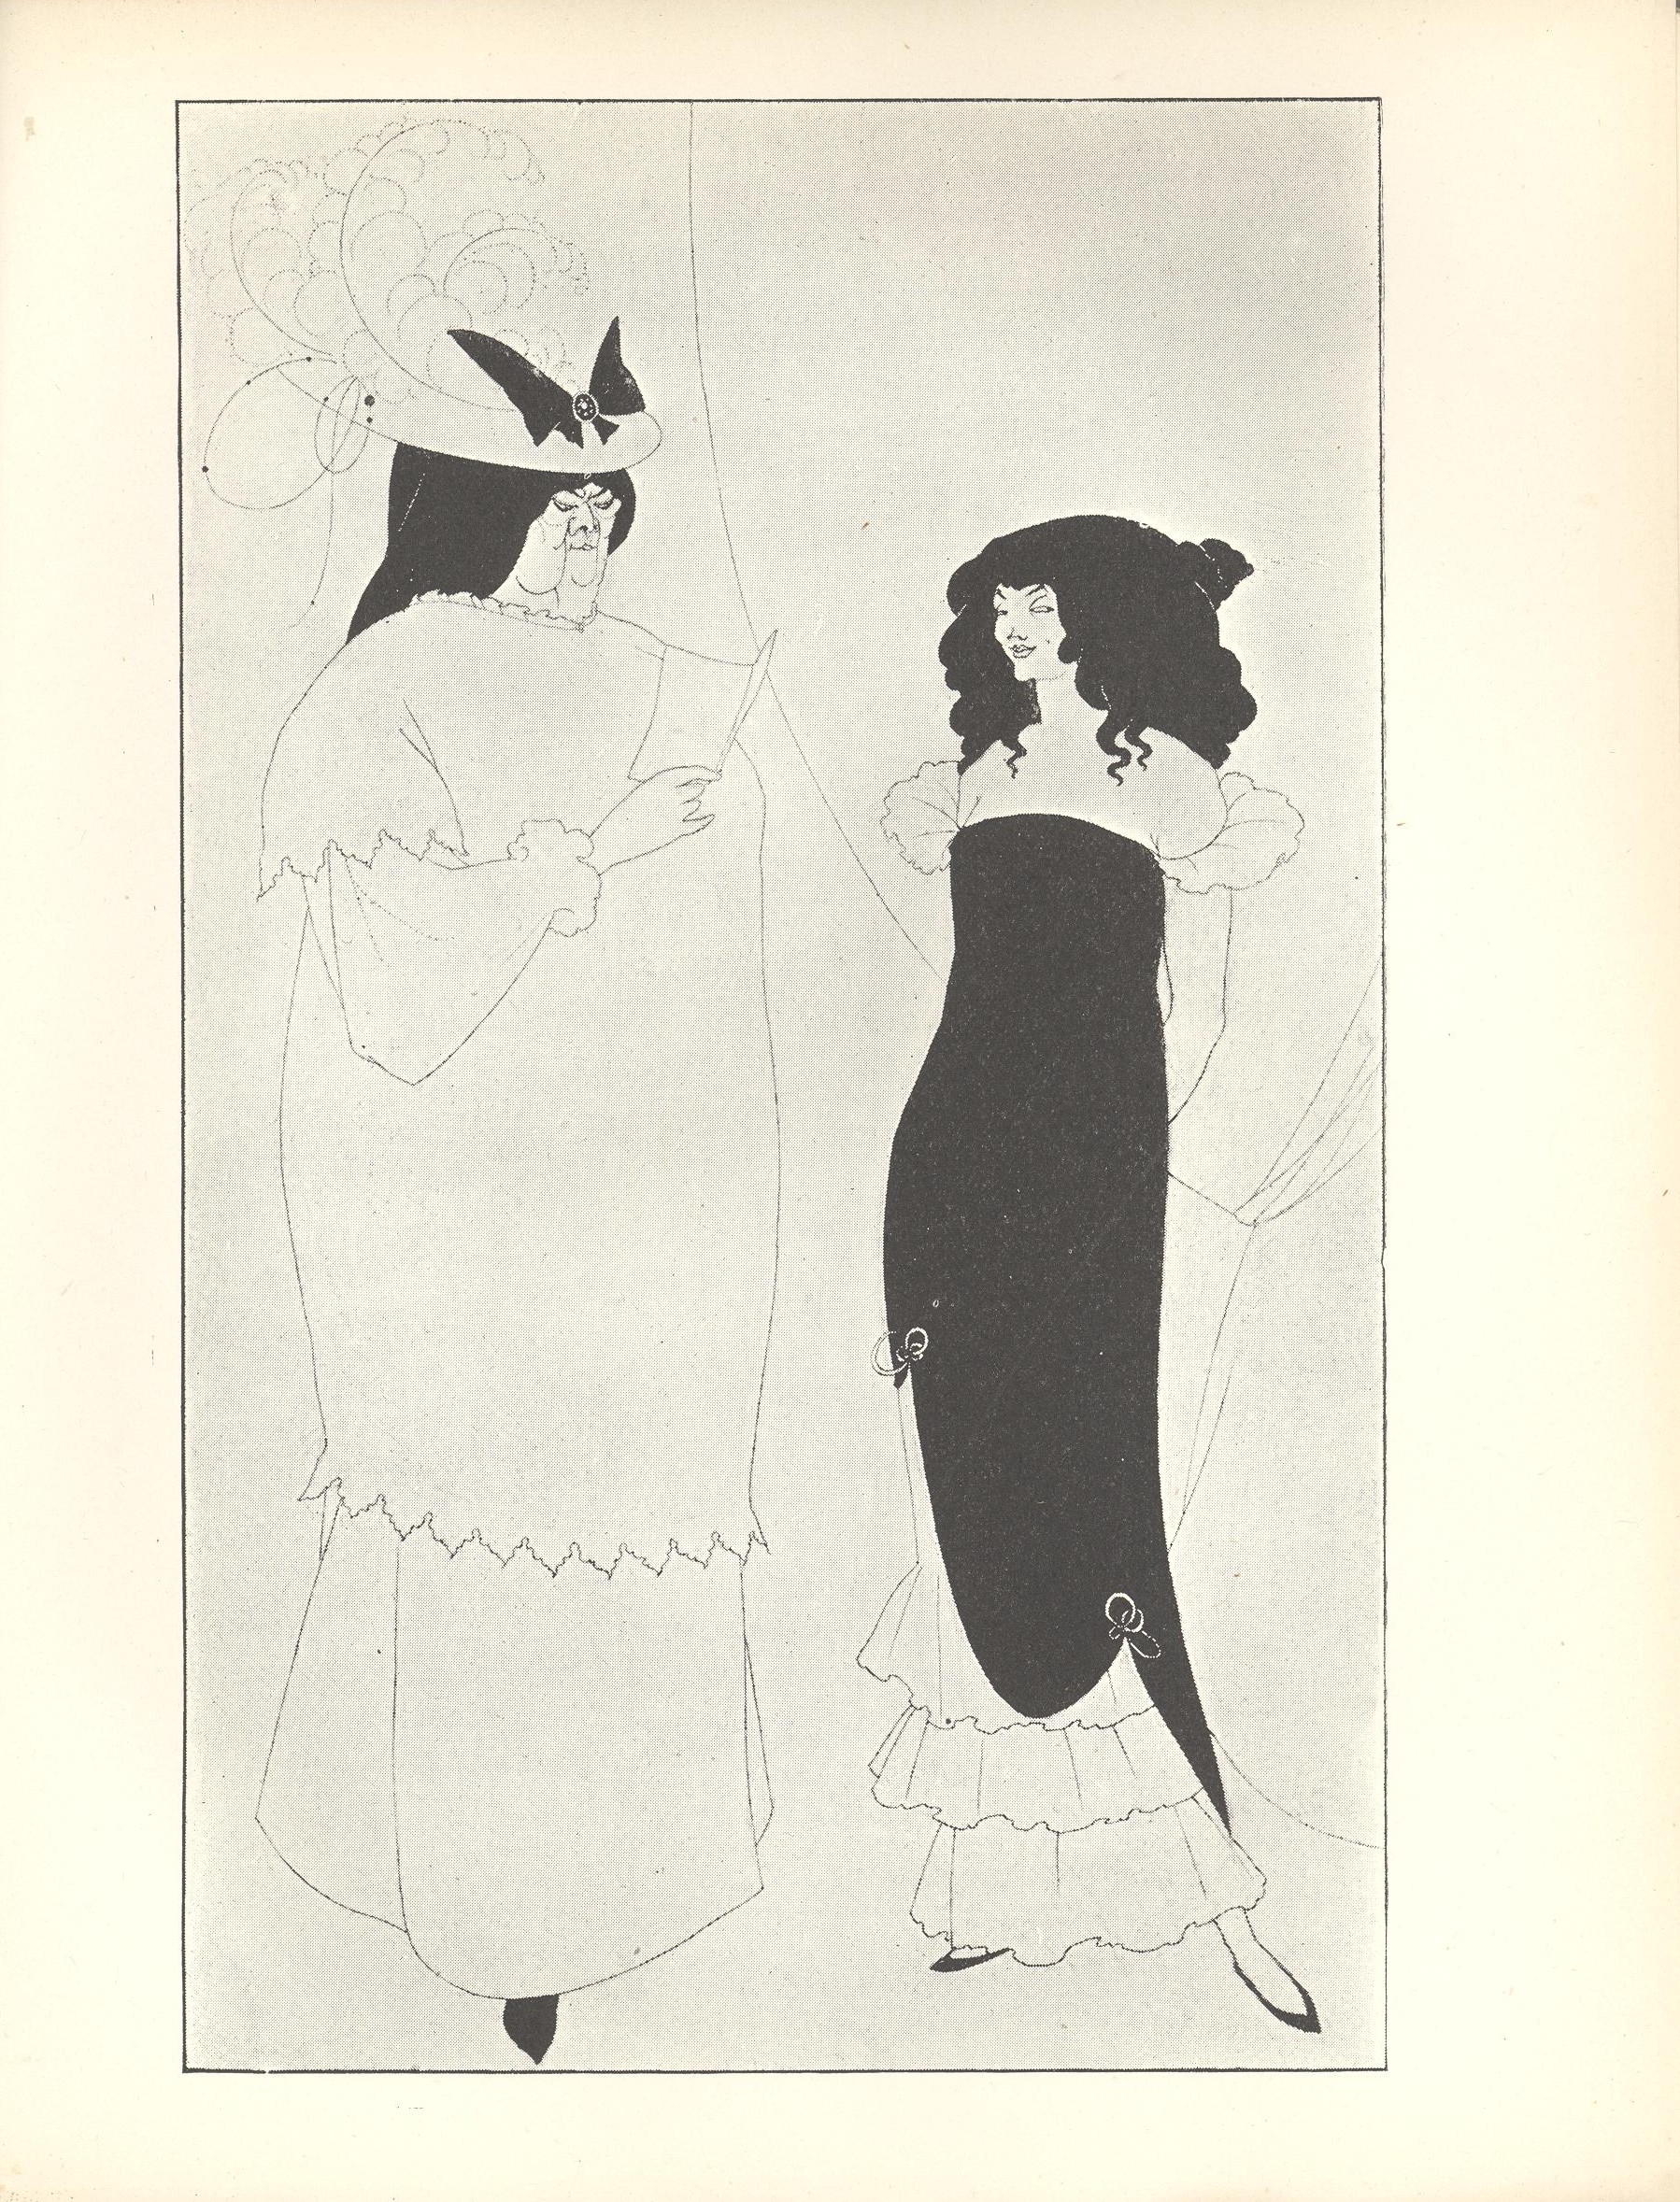 Two full length women face each other in front of a theatrical curtain This curtain is in the middle ground and takes up 1 3rd of the image The curtain is positioned behind the younger woman dividing the image in half vertically To the left there is an older larger woman with black hair who fills almost the entire left side She is wearing an elaborate hat and reading a book to a smaller young woman to her right This young woman is wearing an off the shoulder black evening dress standing with her hands behind her back and looking sideways to the right The image is vertically displayed